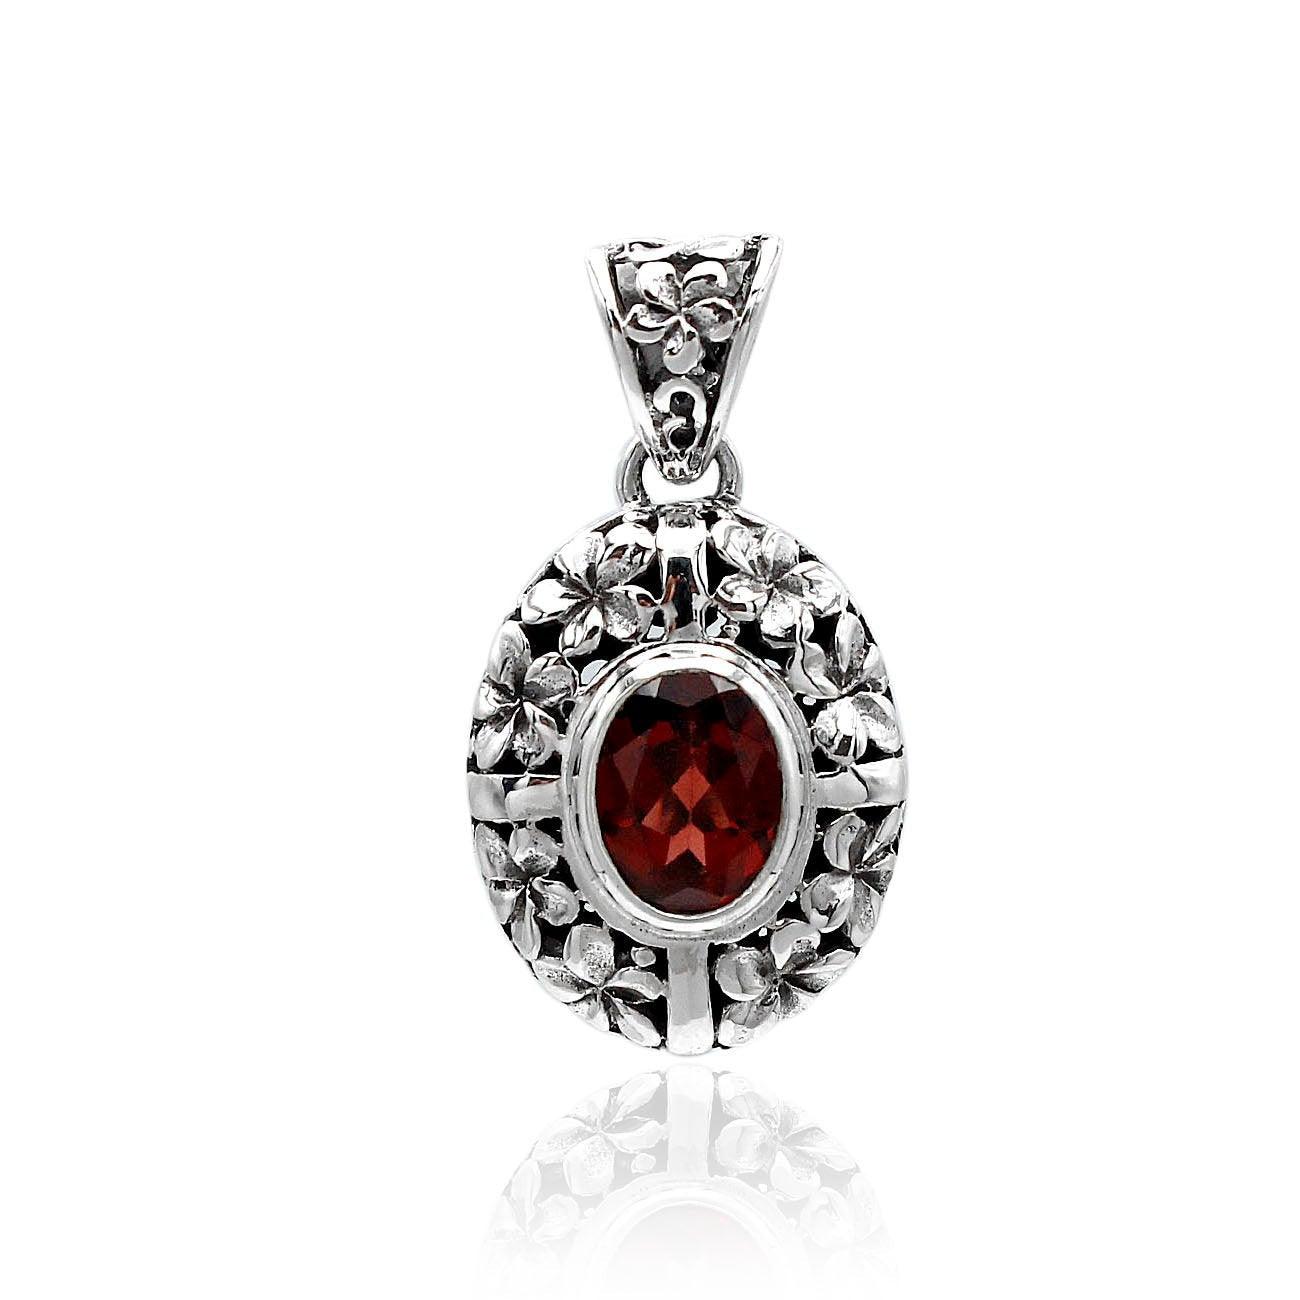 Floral RED GARNET Gemstone Charm Pendant Necklace in 925 Sterling Silver with Chain - 2.8 Cm - Inspiring Jewellery